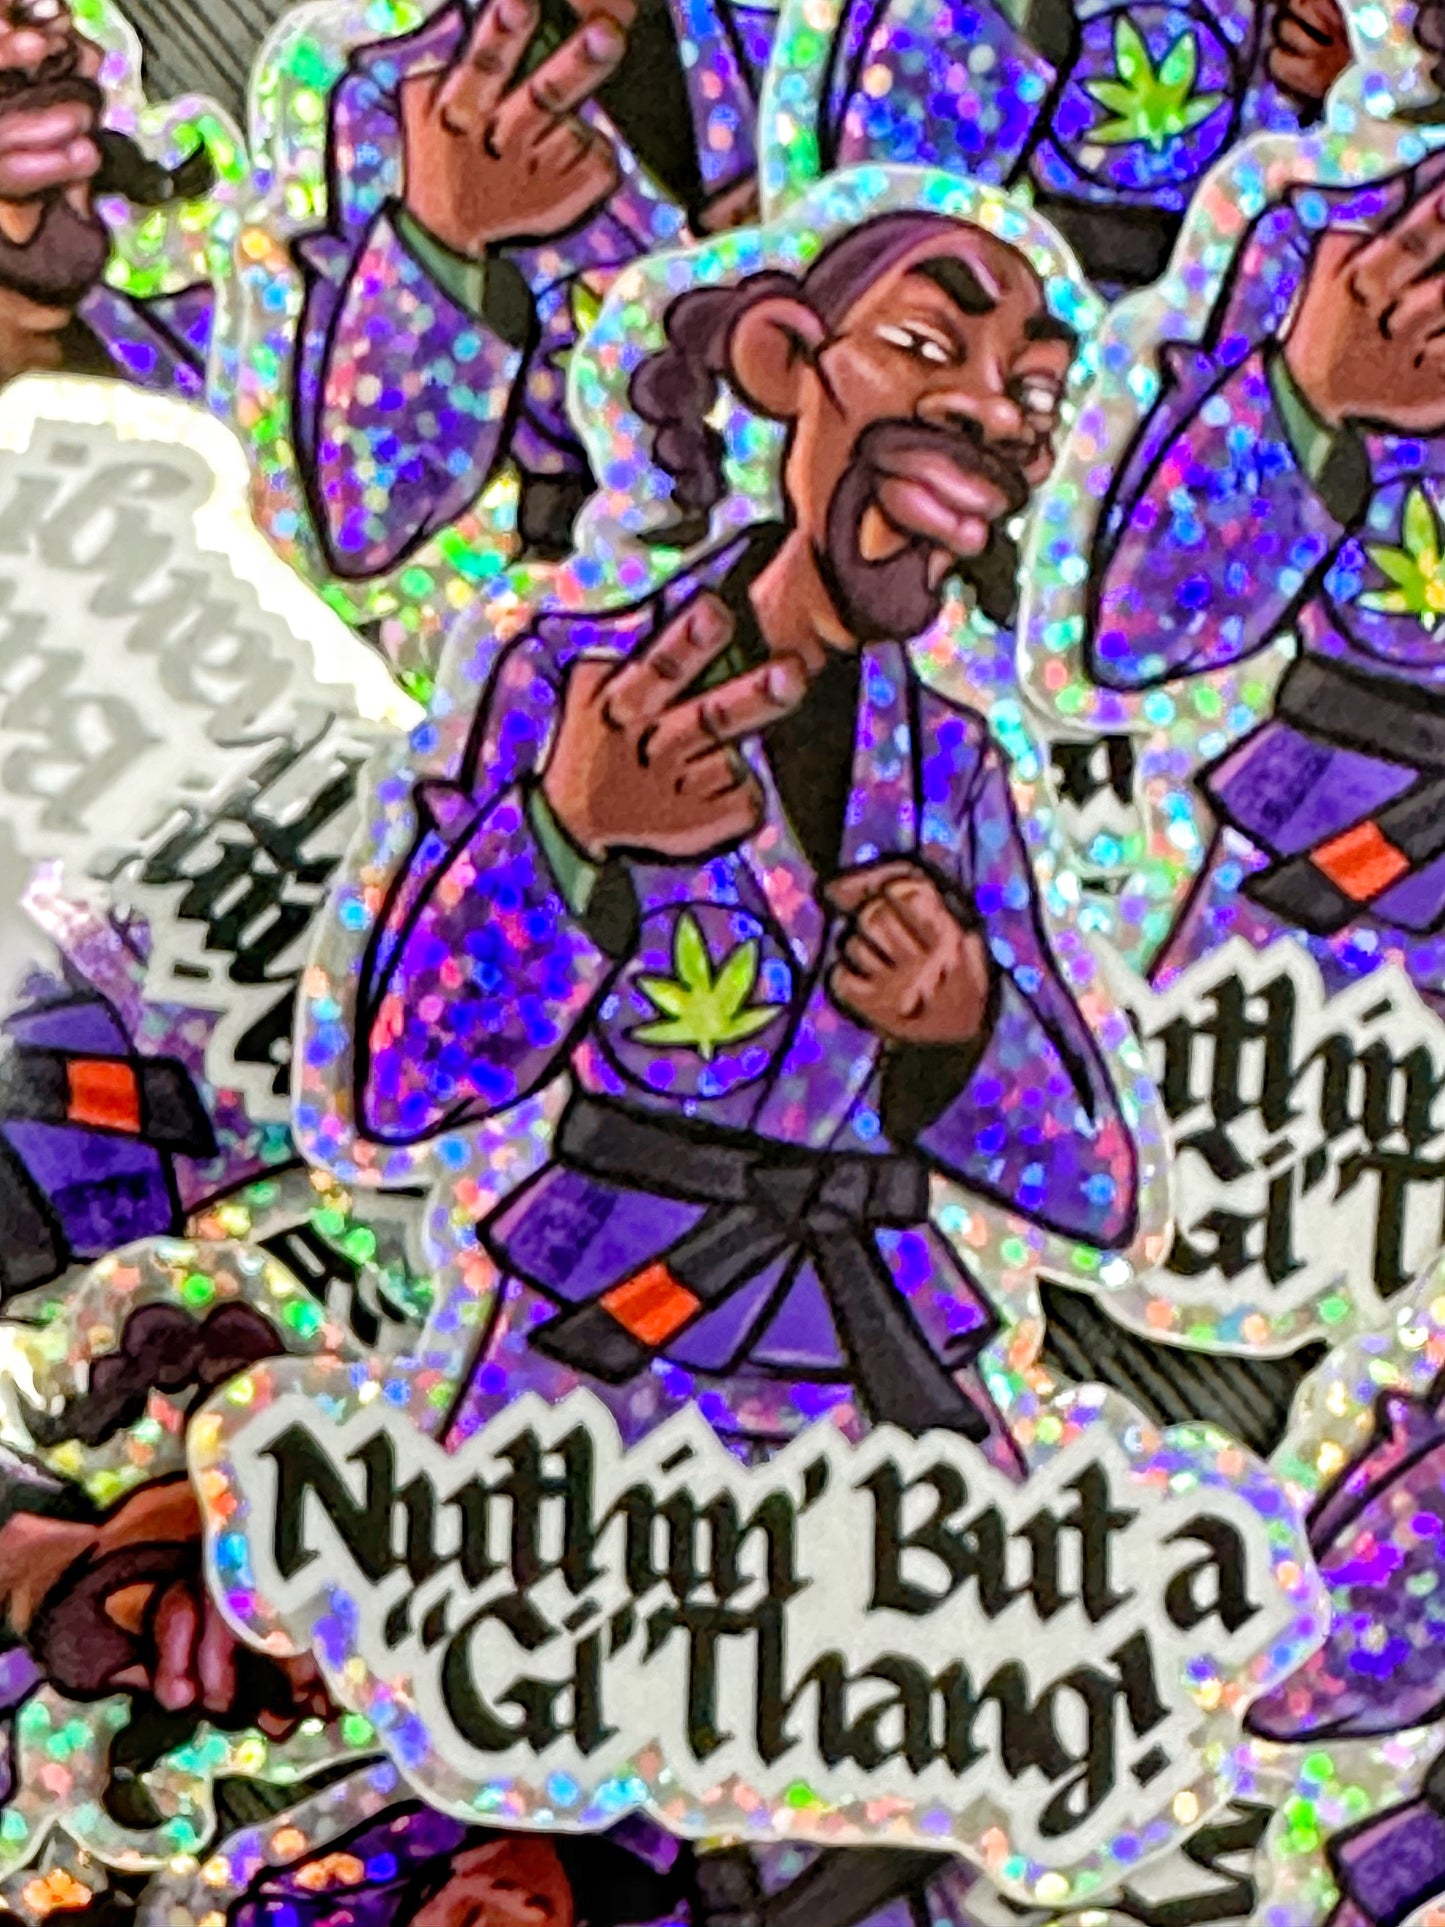 Snoop Dogg “Nuthin' but a 'GI' thang” Vinyl sticker